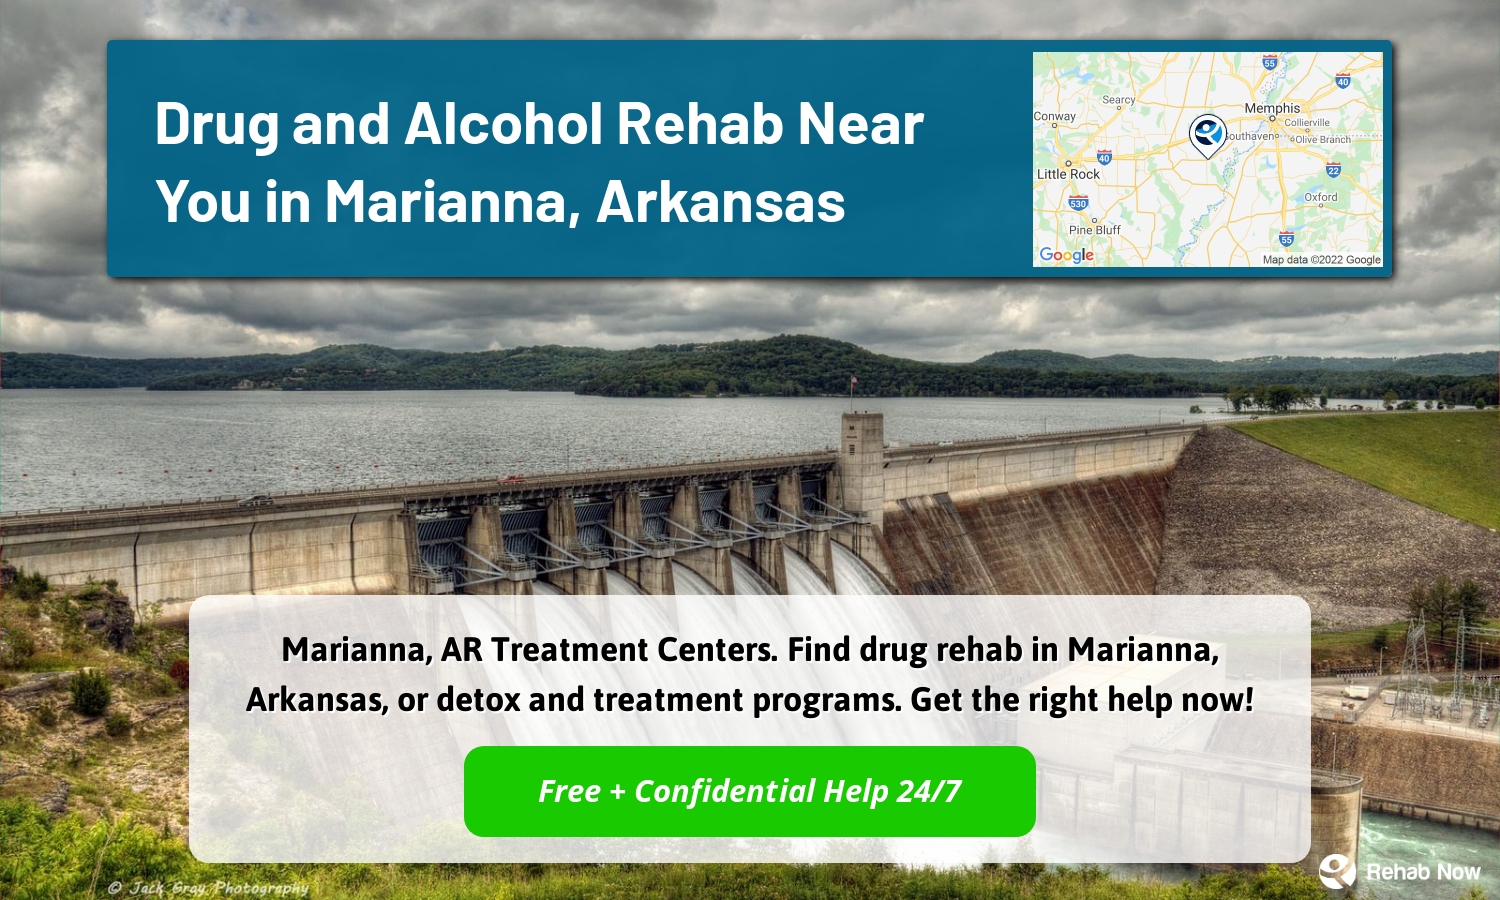 Marianna, AR Treatment Centers. Find drug rehab in Marianna, Arkansas, or detox and treatment programs. Get the right help now!